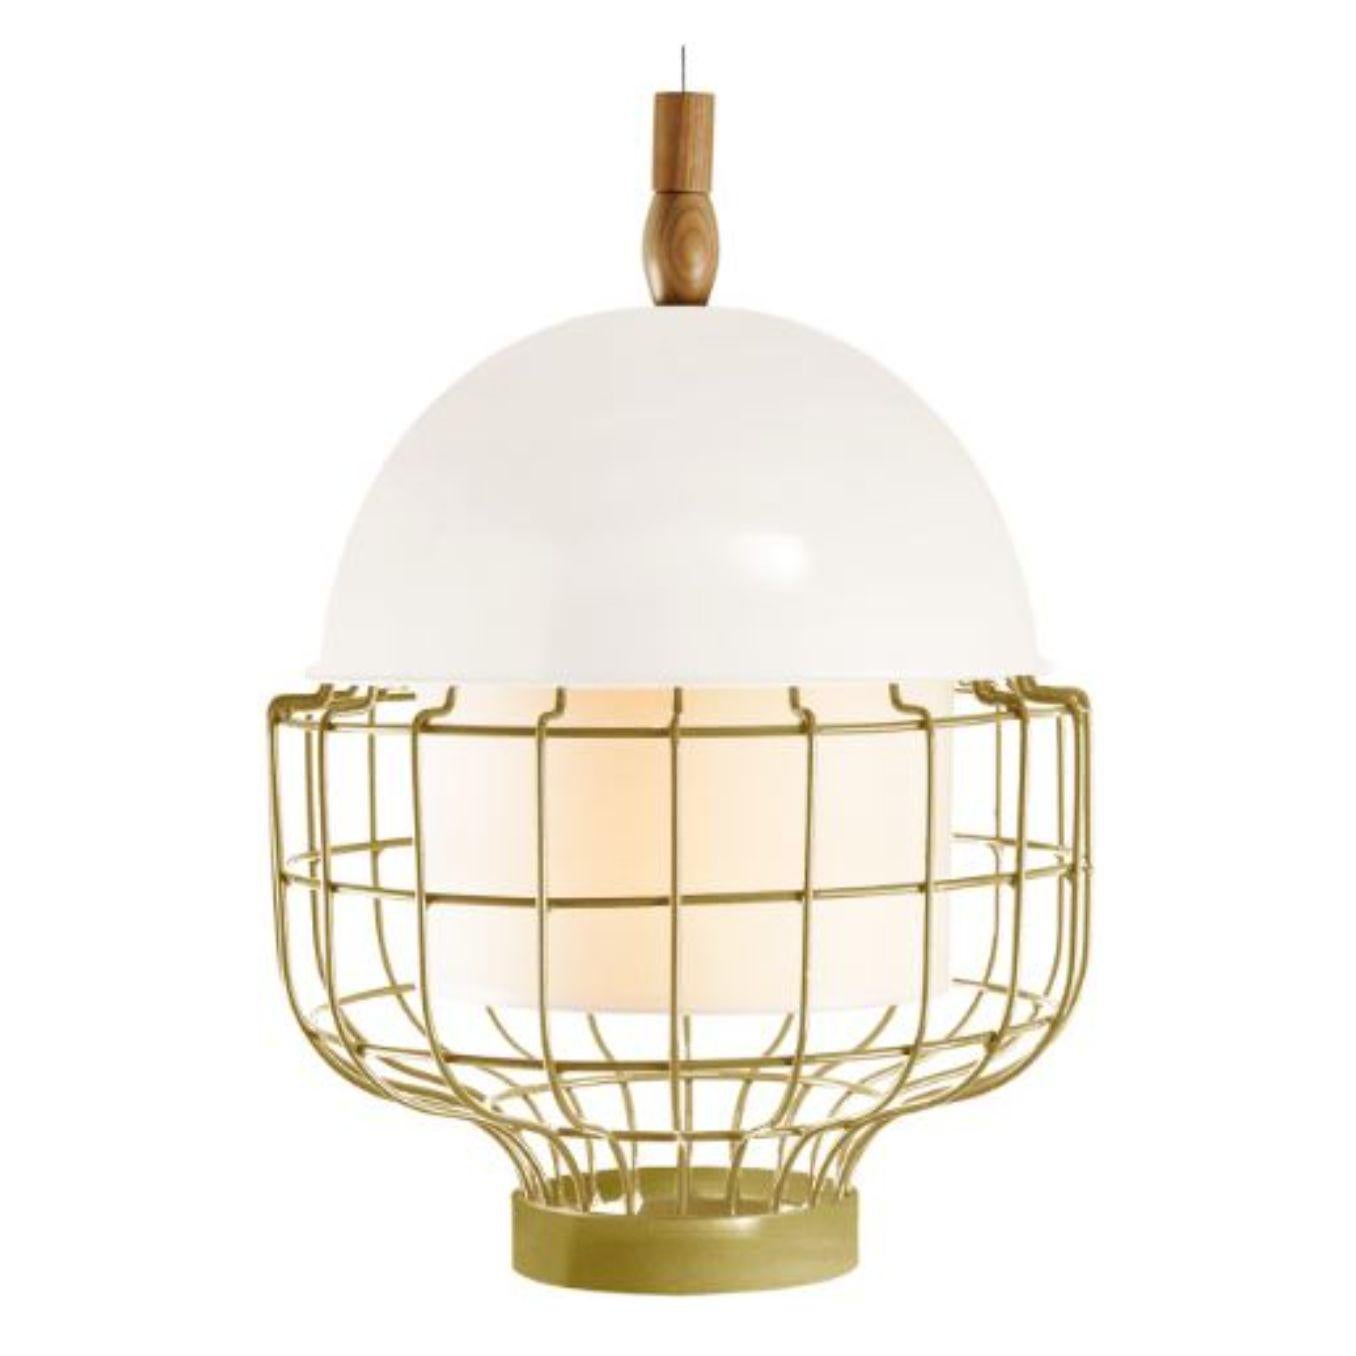 Cobalt Magnolia III Suspension Lamp with Brass Ring by Dooq For Sale 4